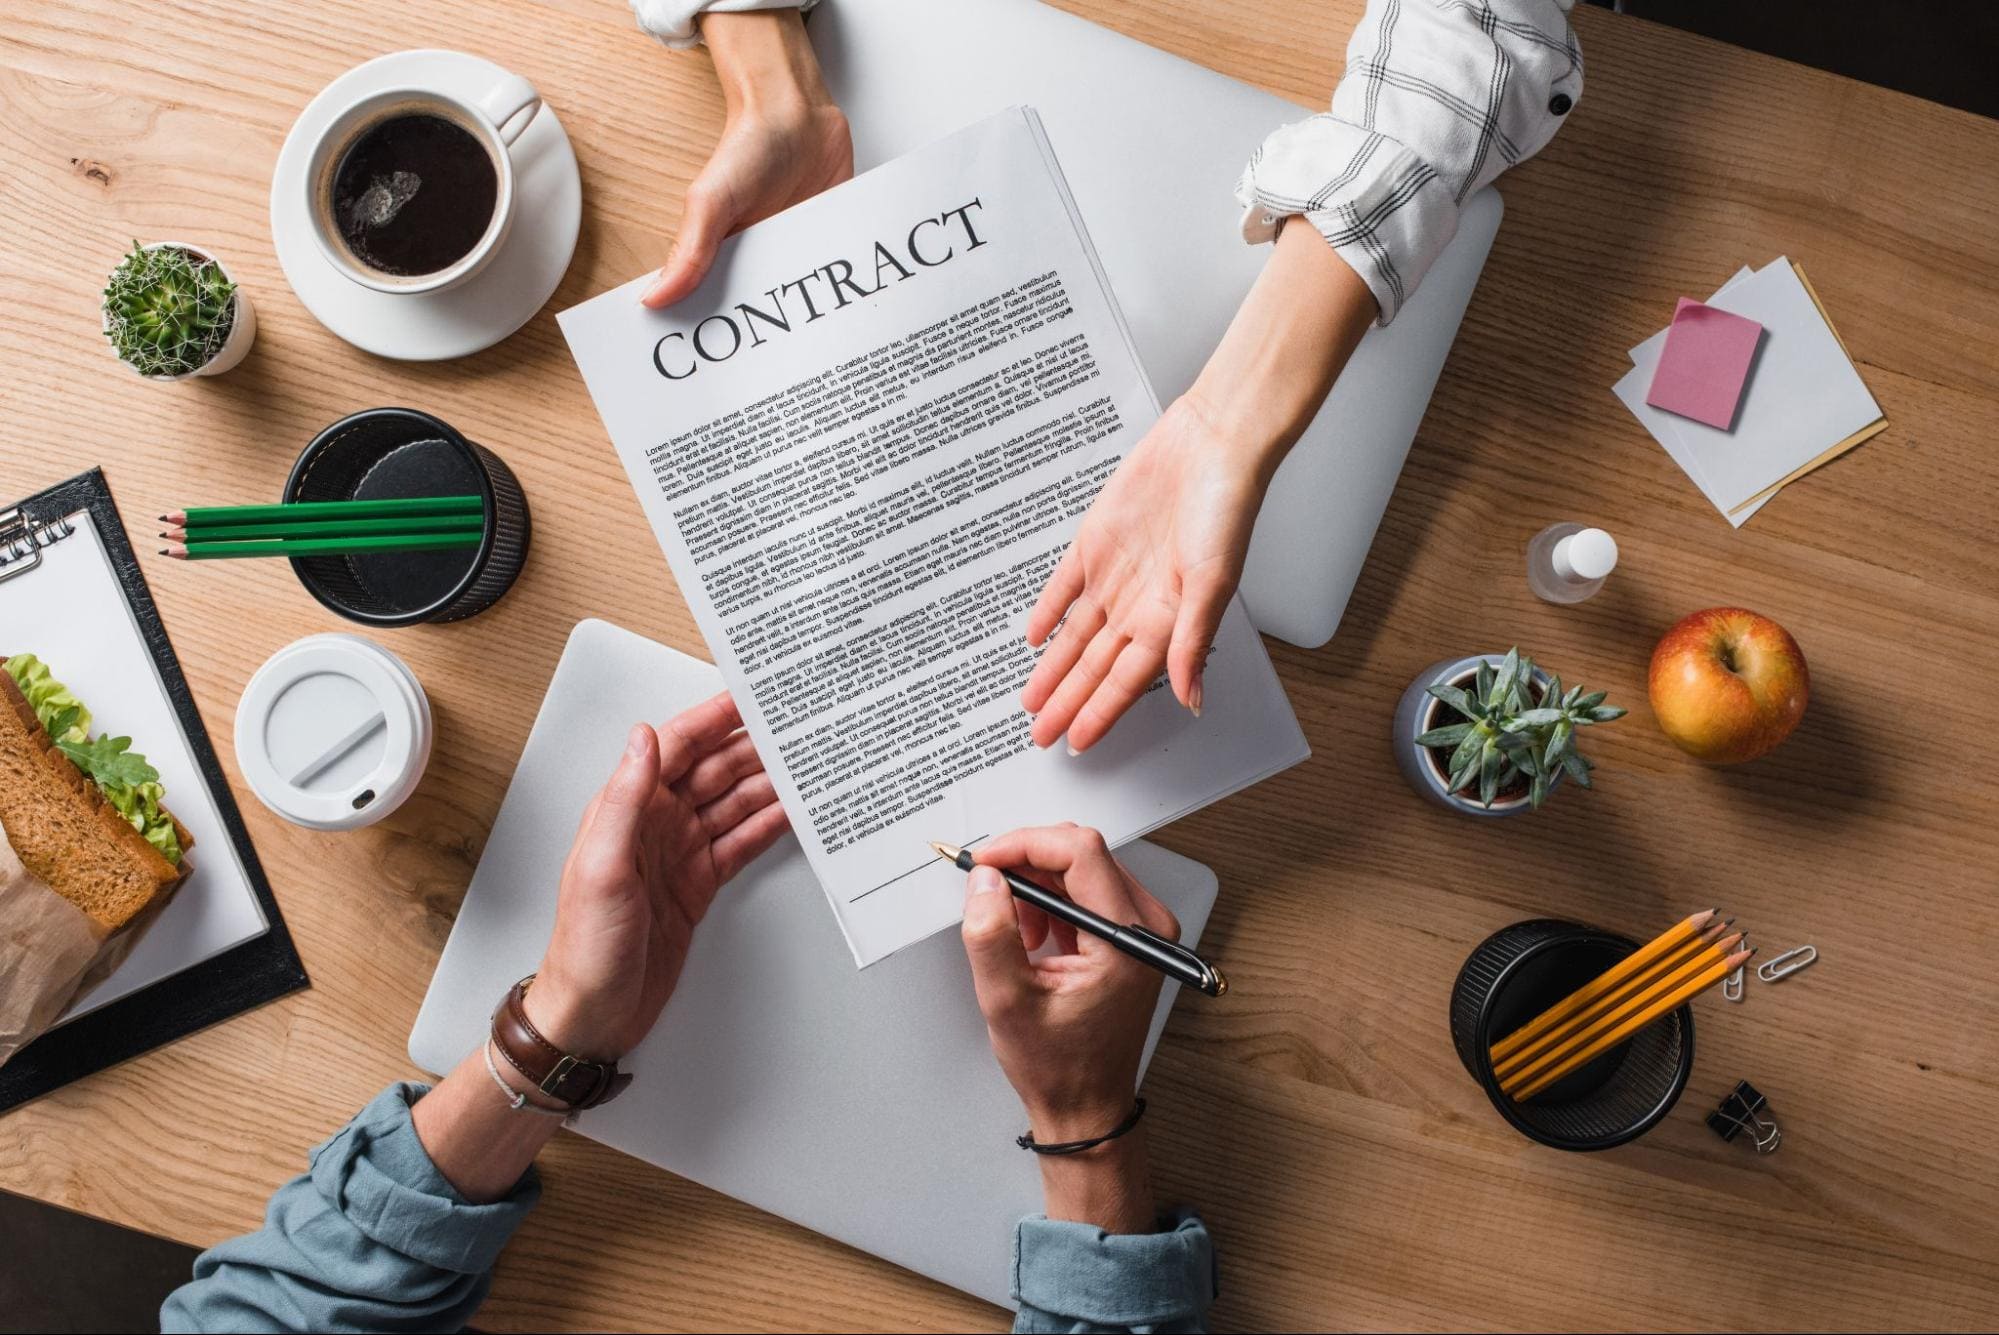 The most important skills of a contract manager